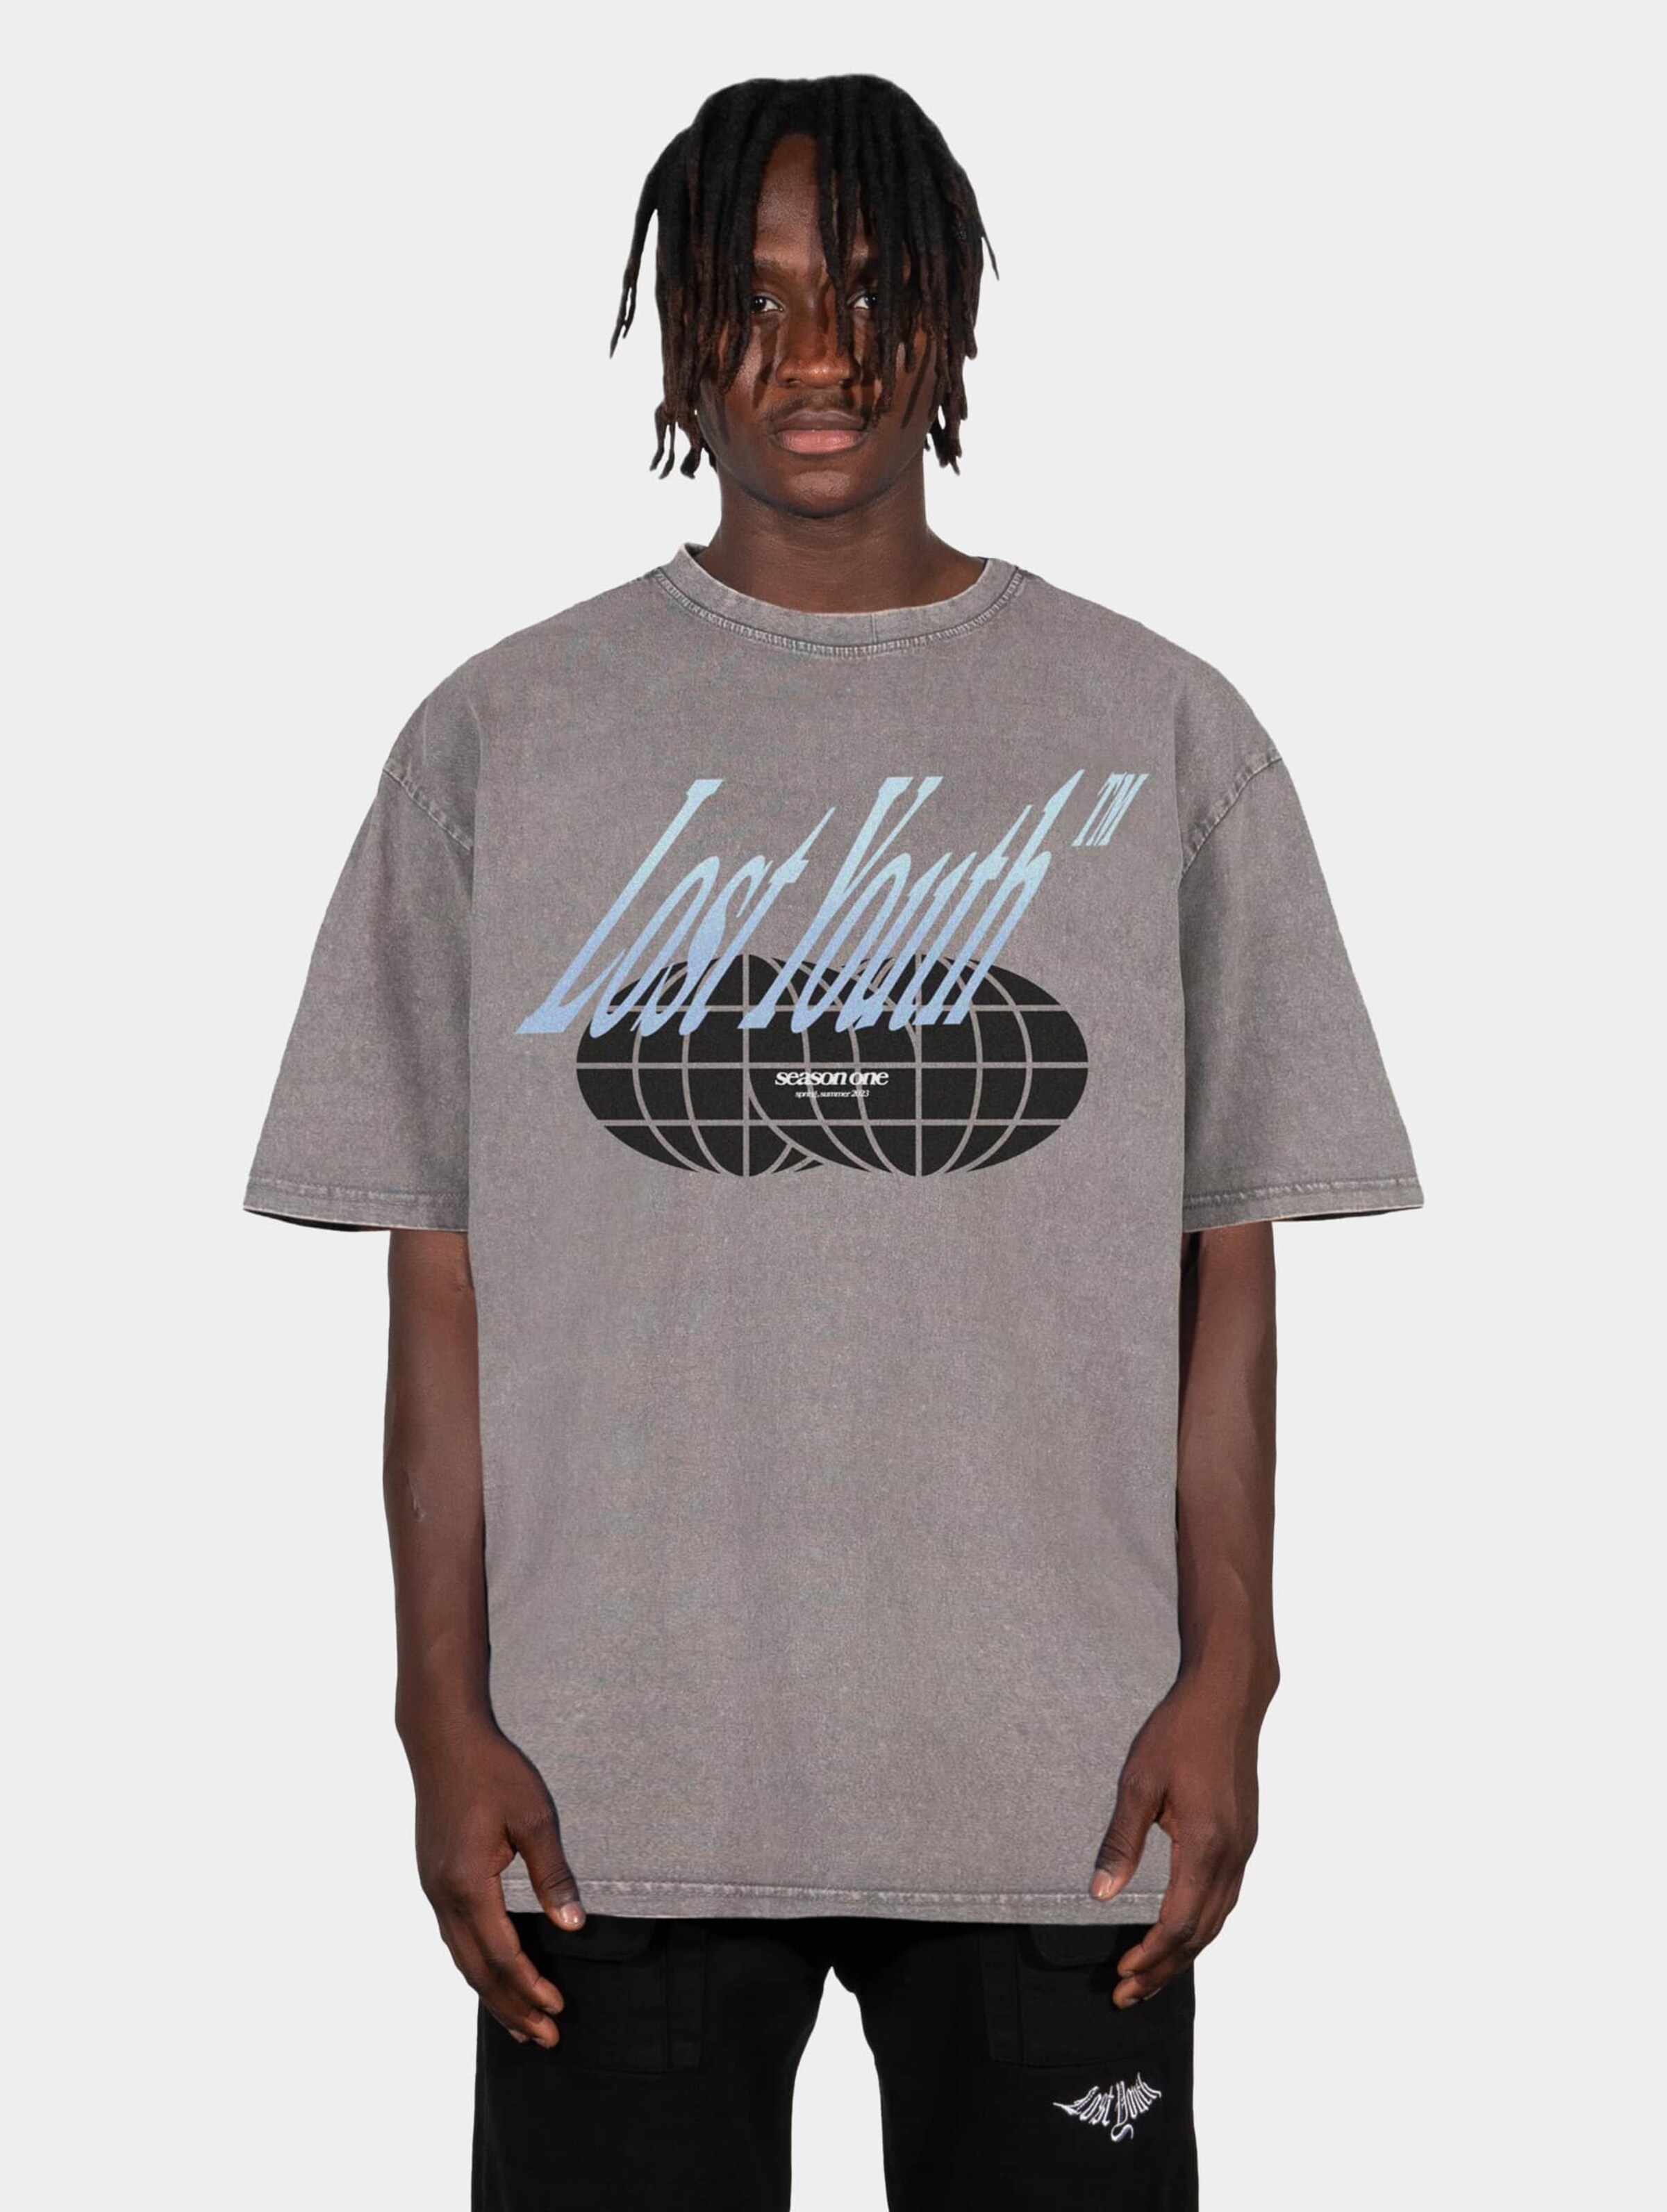 Lost Youth LY TEE- ICON V.5 Mannen op kleur grijs, Maat 4XL